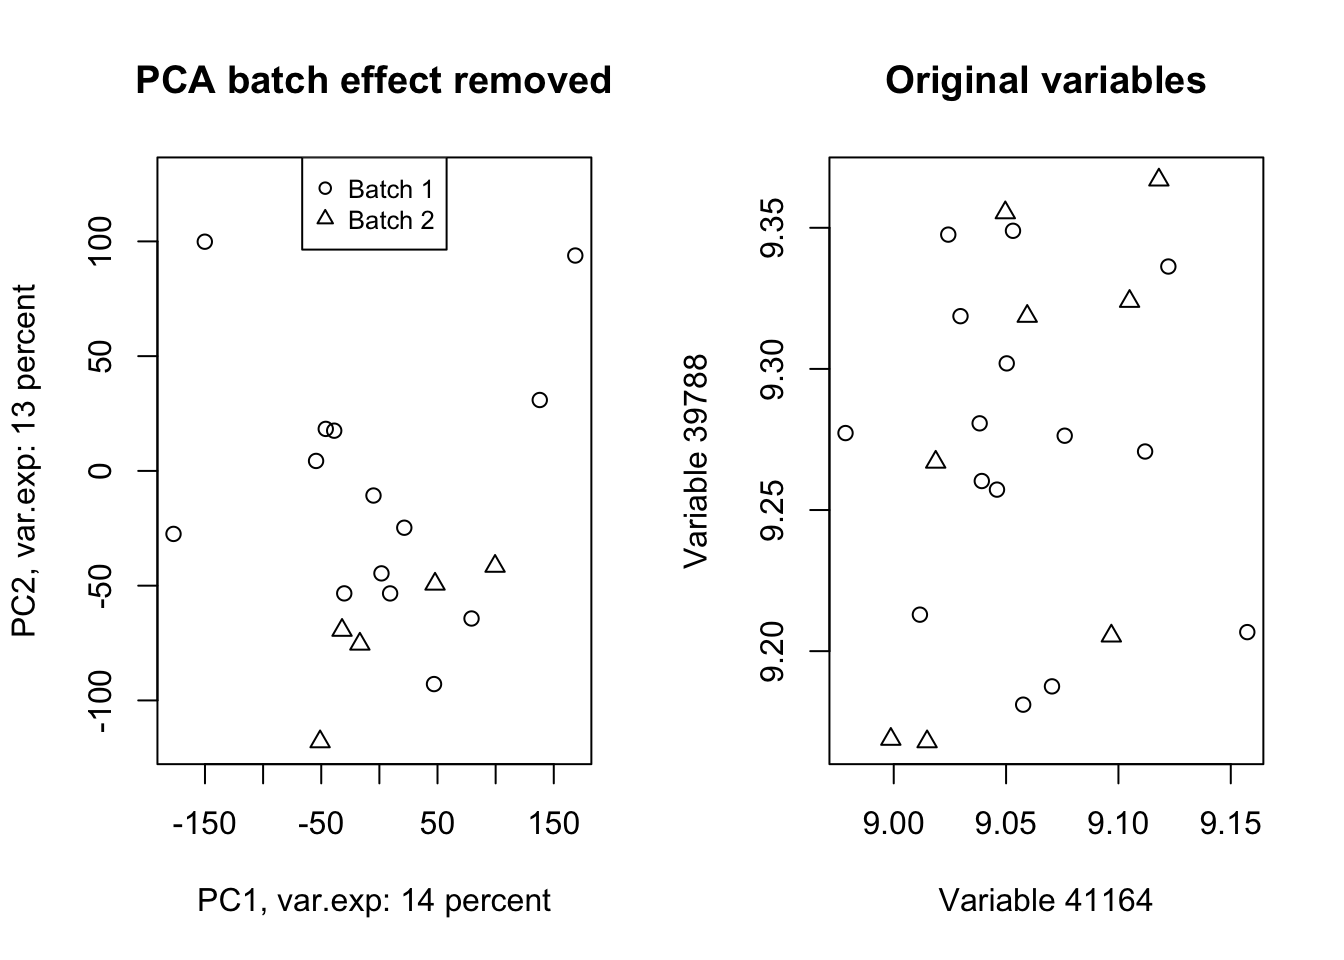 PCA of the data showing the removal of batch effect in our data